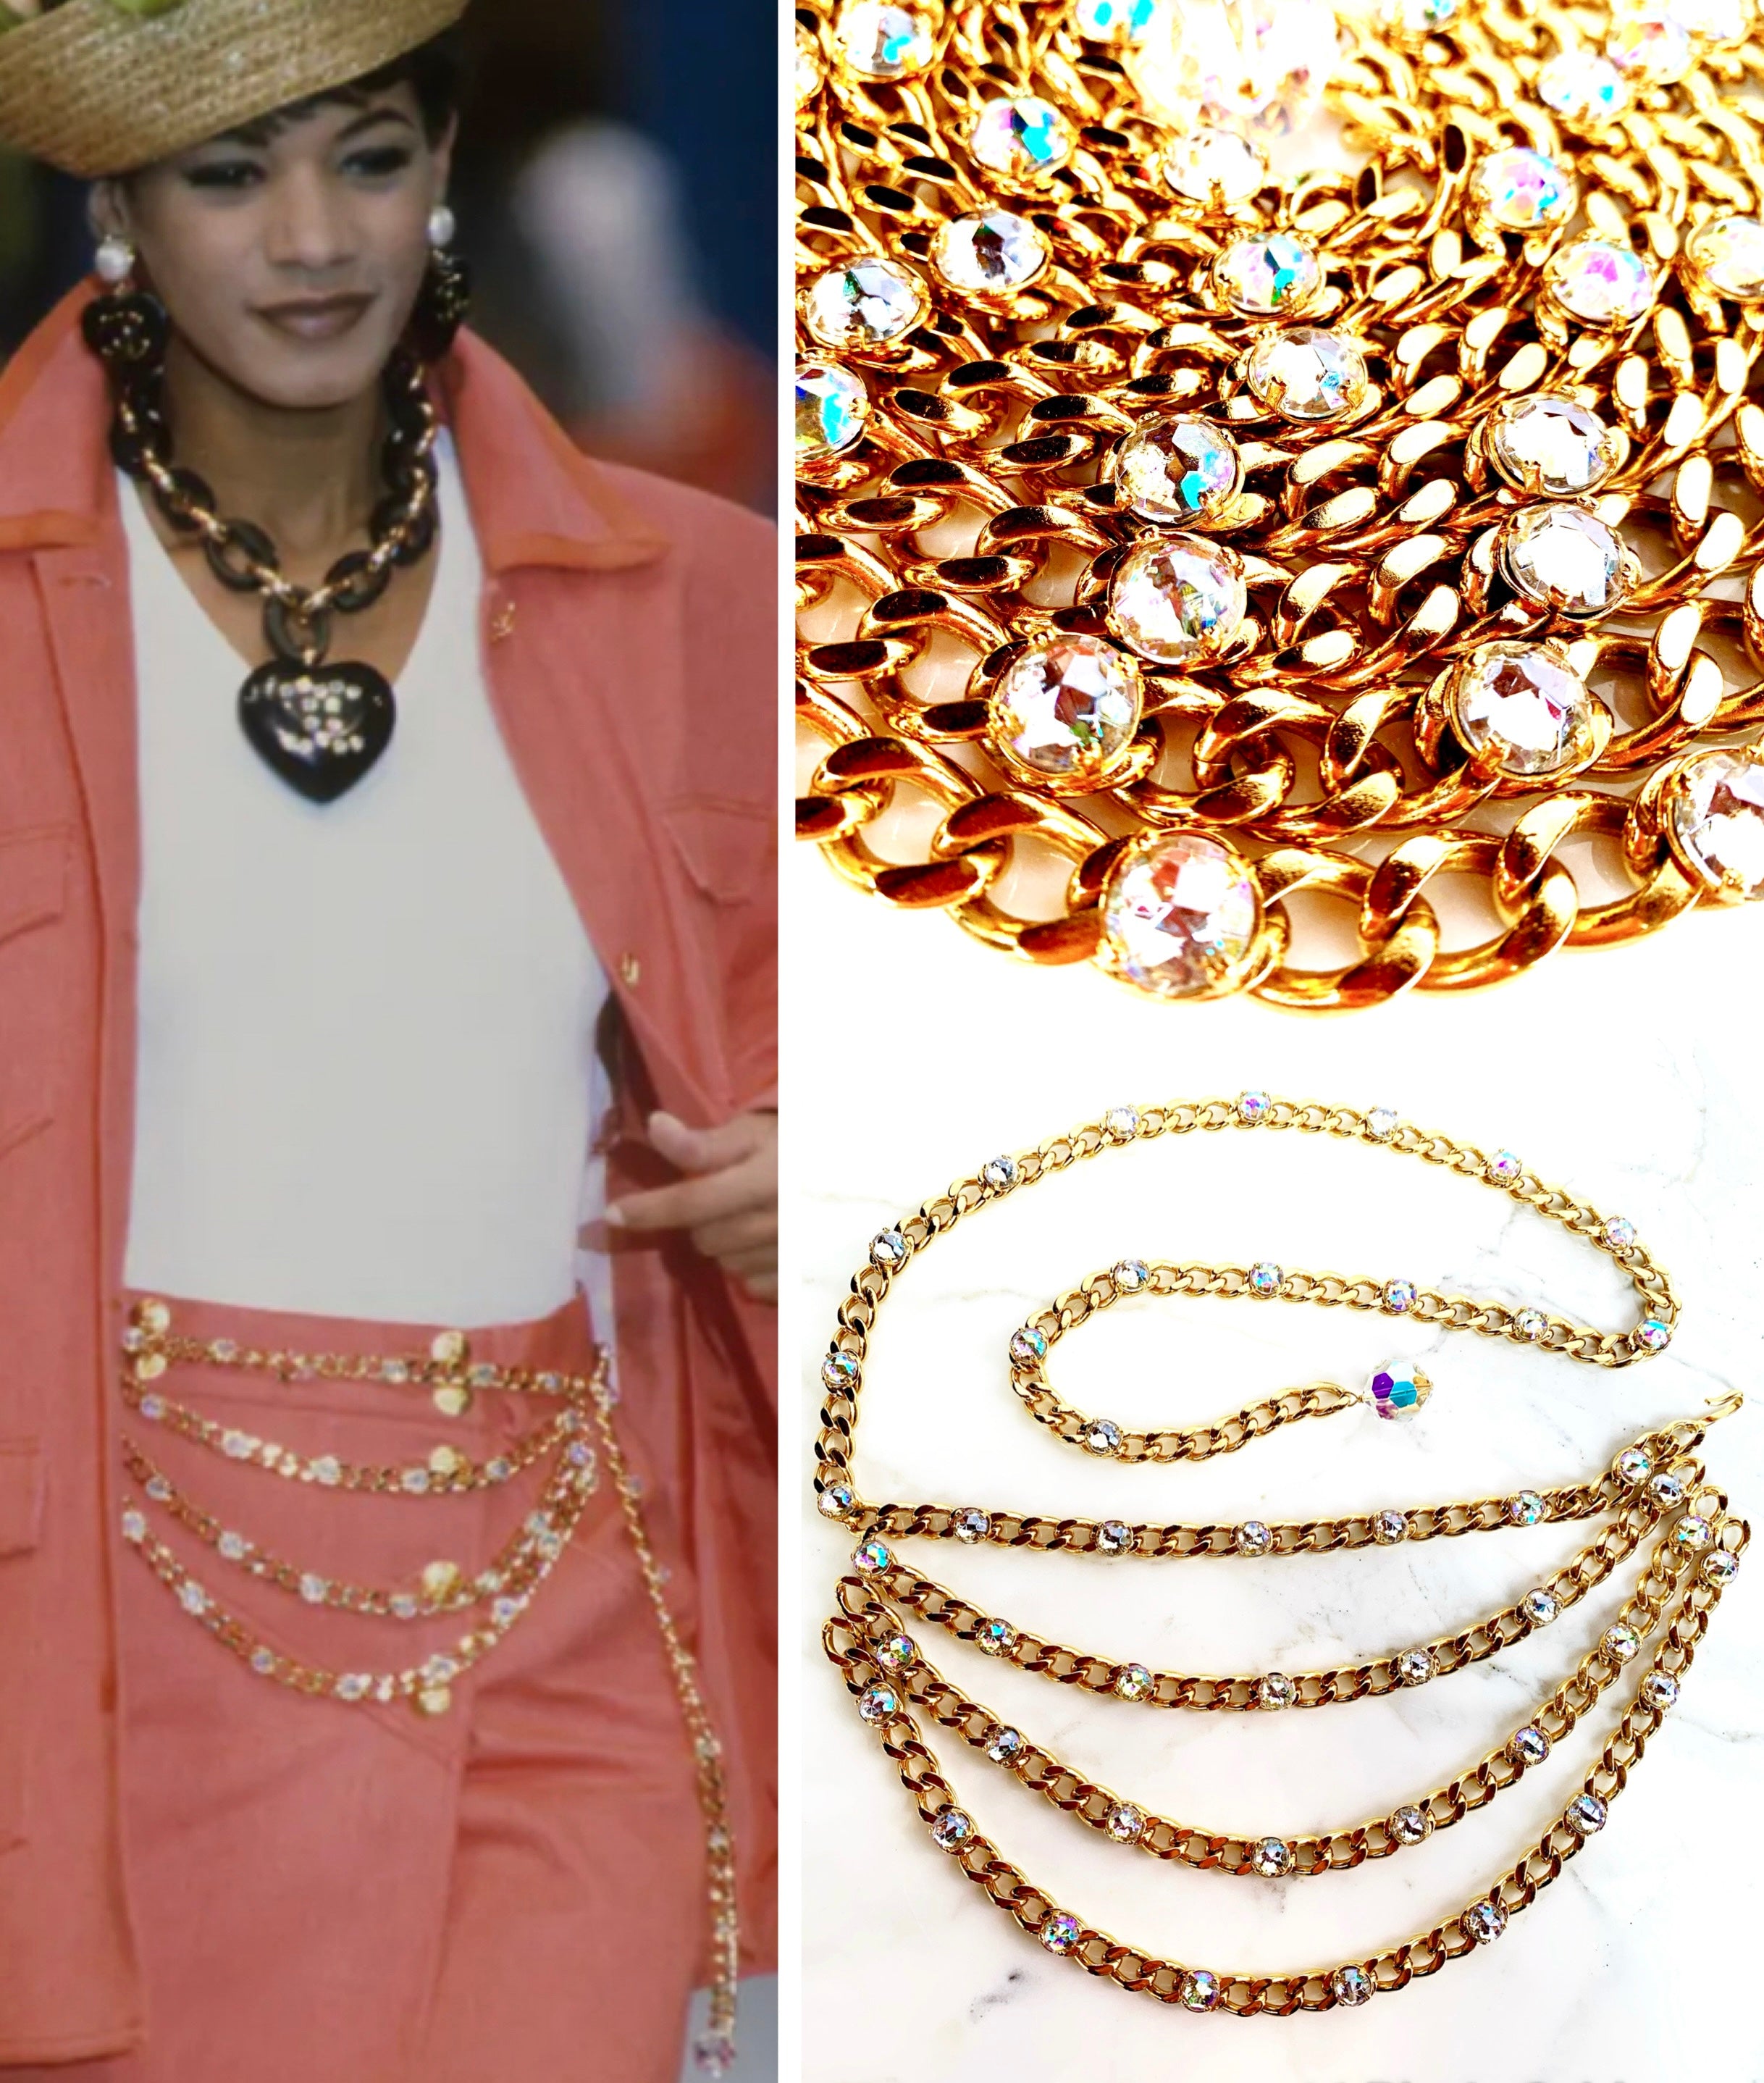 CHANEL ICONIC 4 LAYER HOLOGRAPHIC CRYSTAL CHAIN BELT NECKLACE 1992